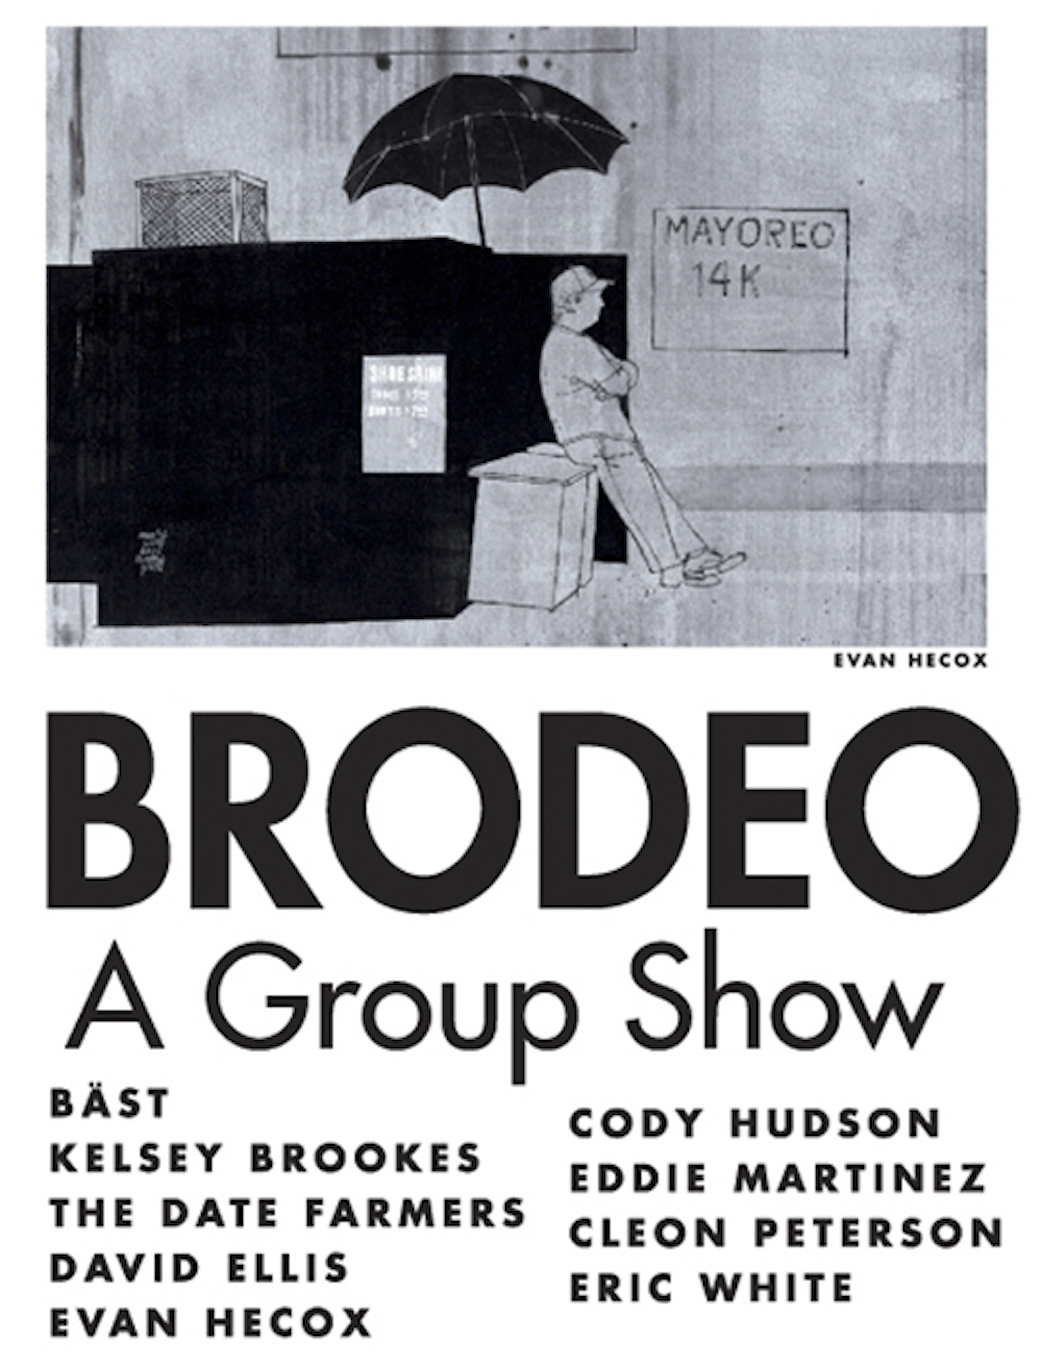 GROUP SHOW - BRODEO